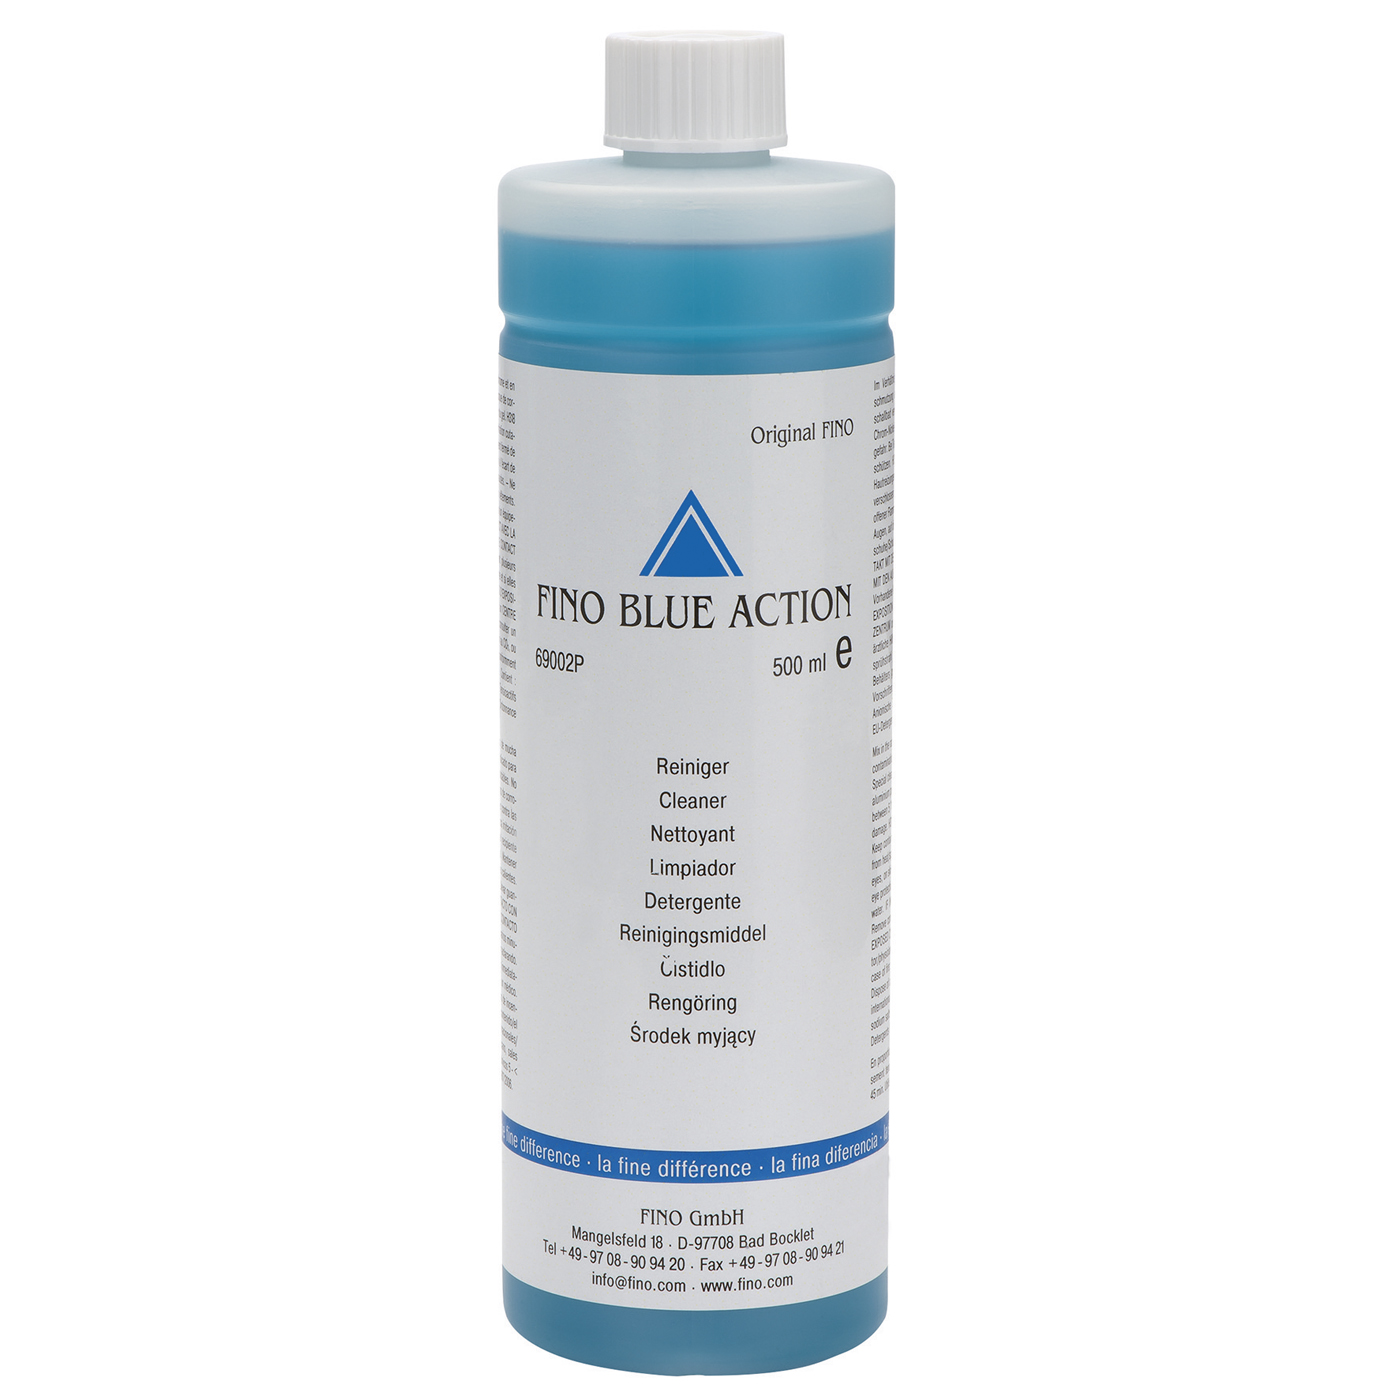 FINO BLUE ACTION Cleaner, Trial Pack - 500 ml